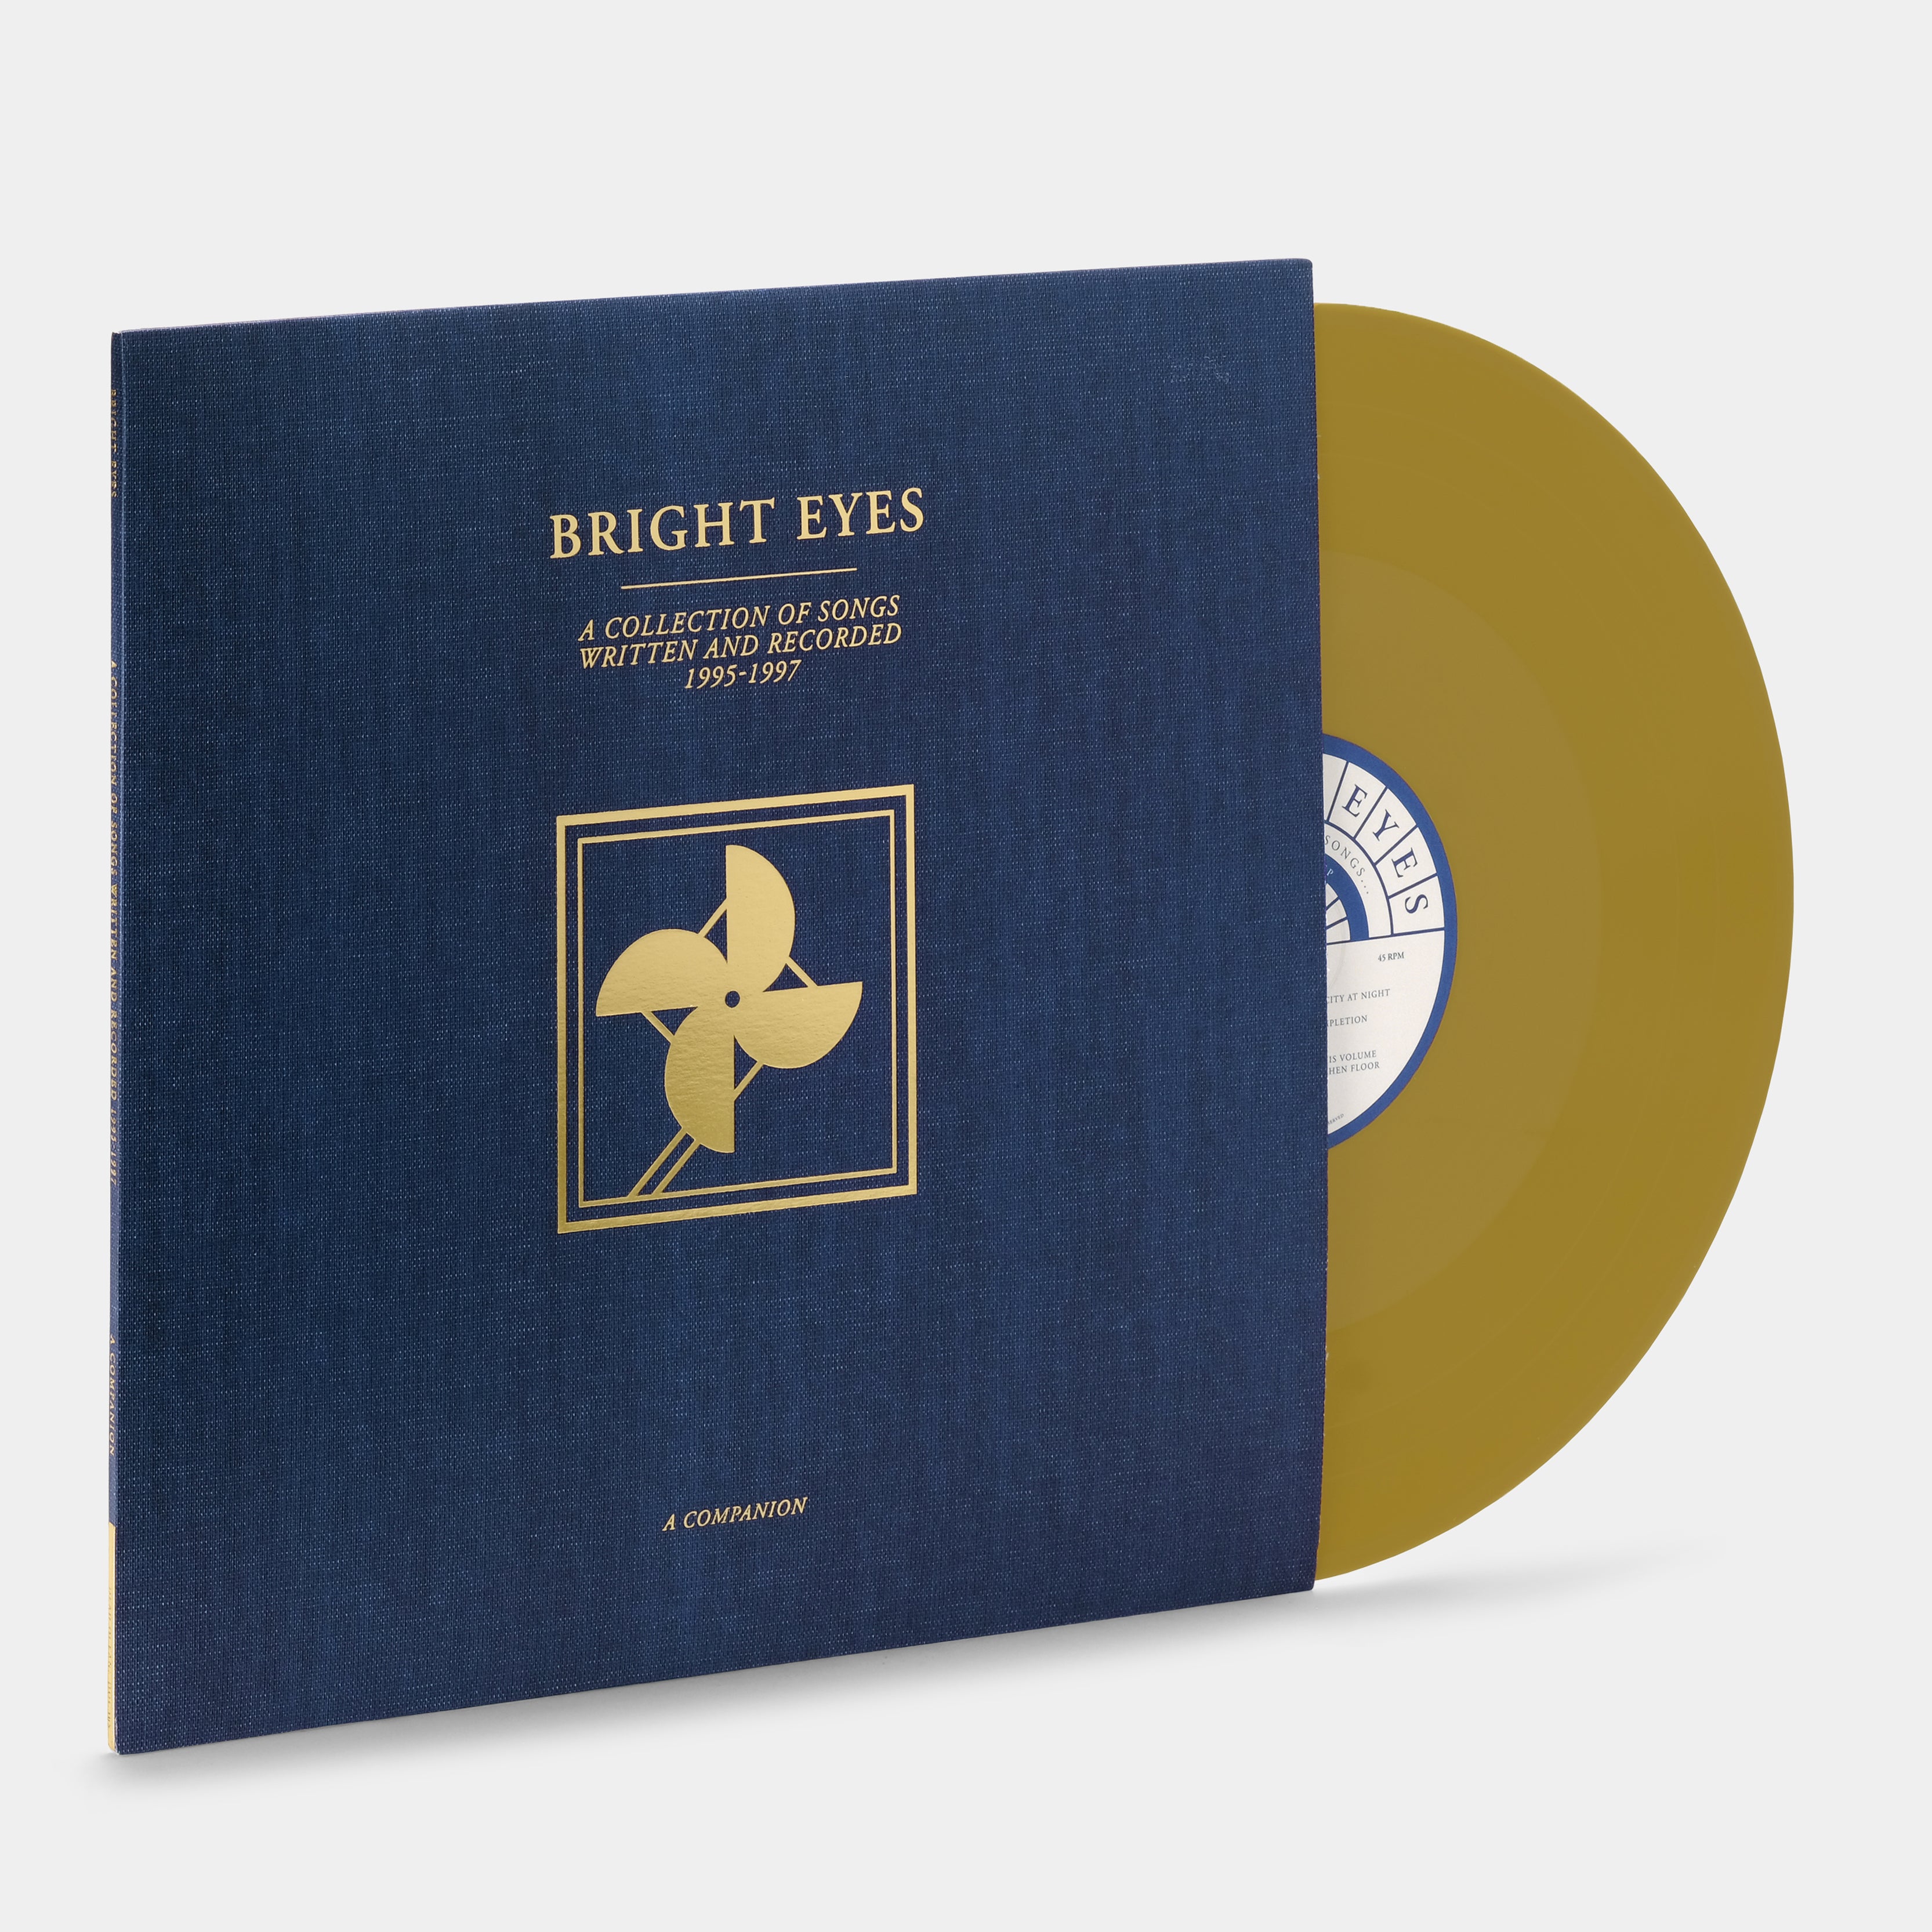 Bright Eyes - A Collection of Songs Written and Recorded 1995 - 1997 (A Companion) EP Opaque Gold Vinyl Record